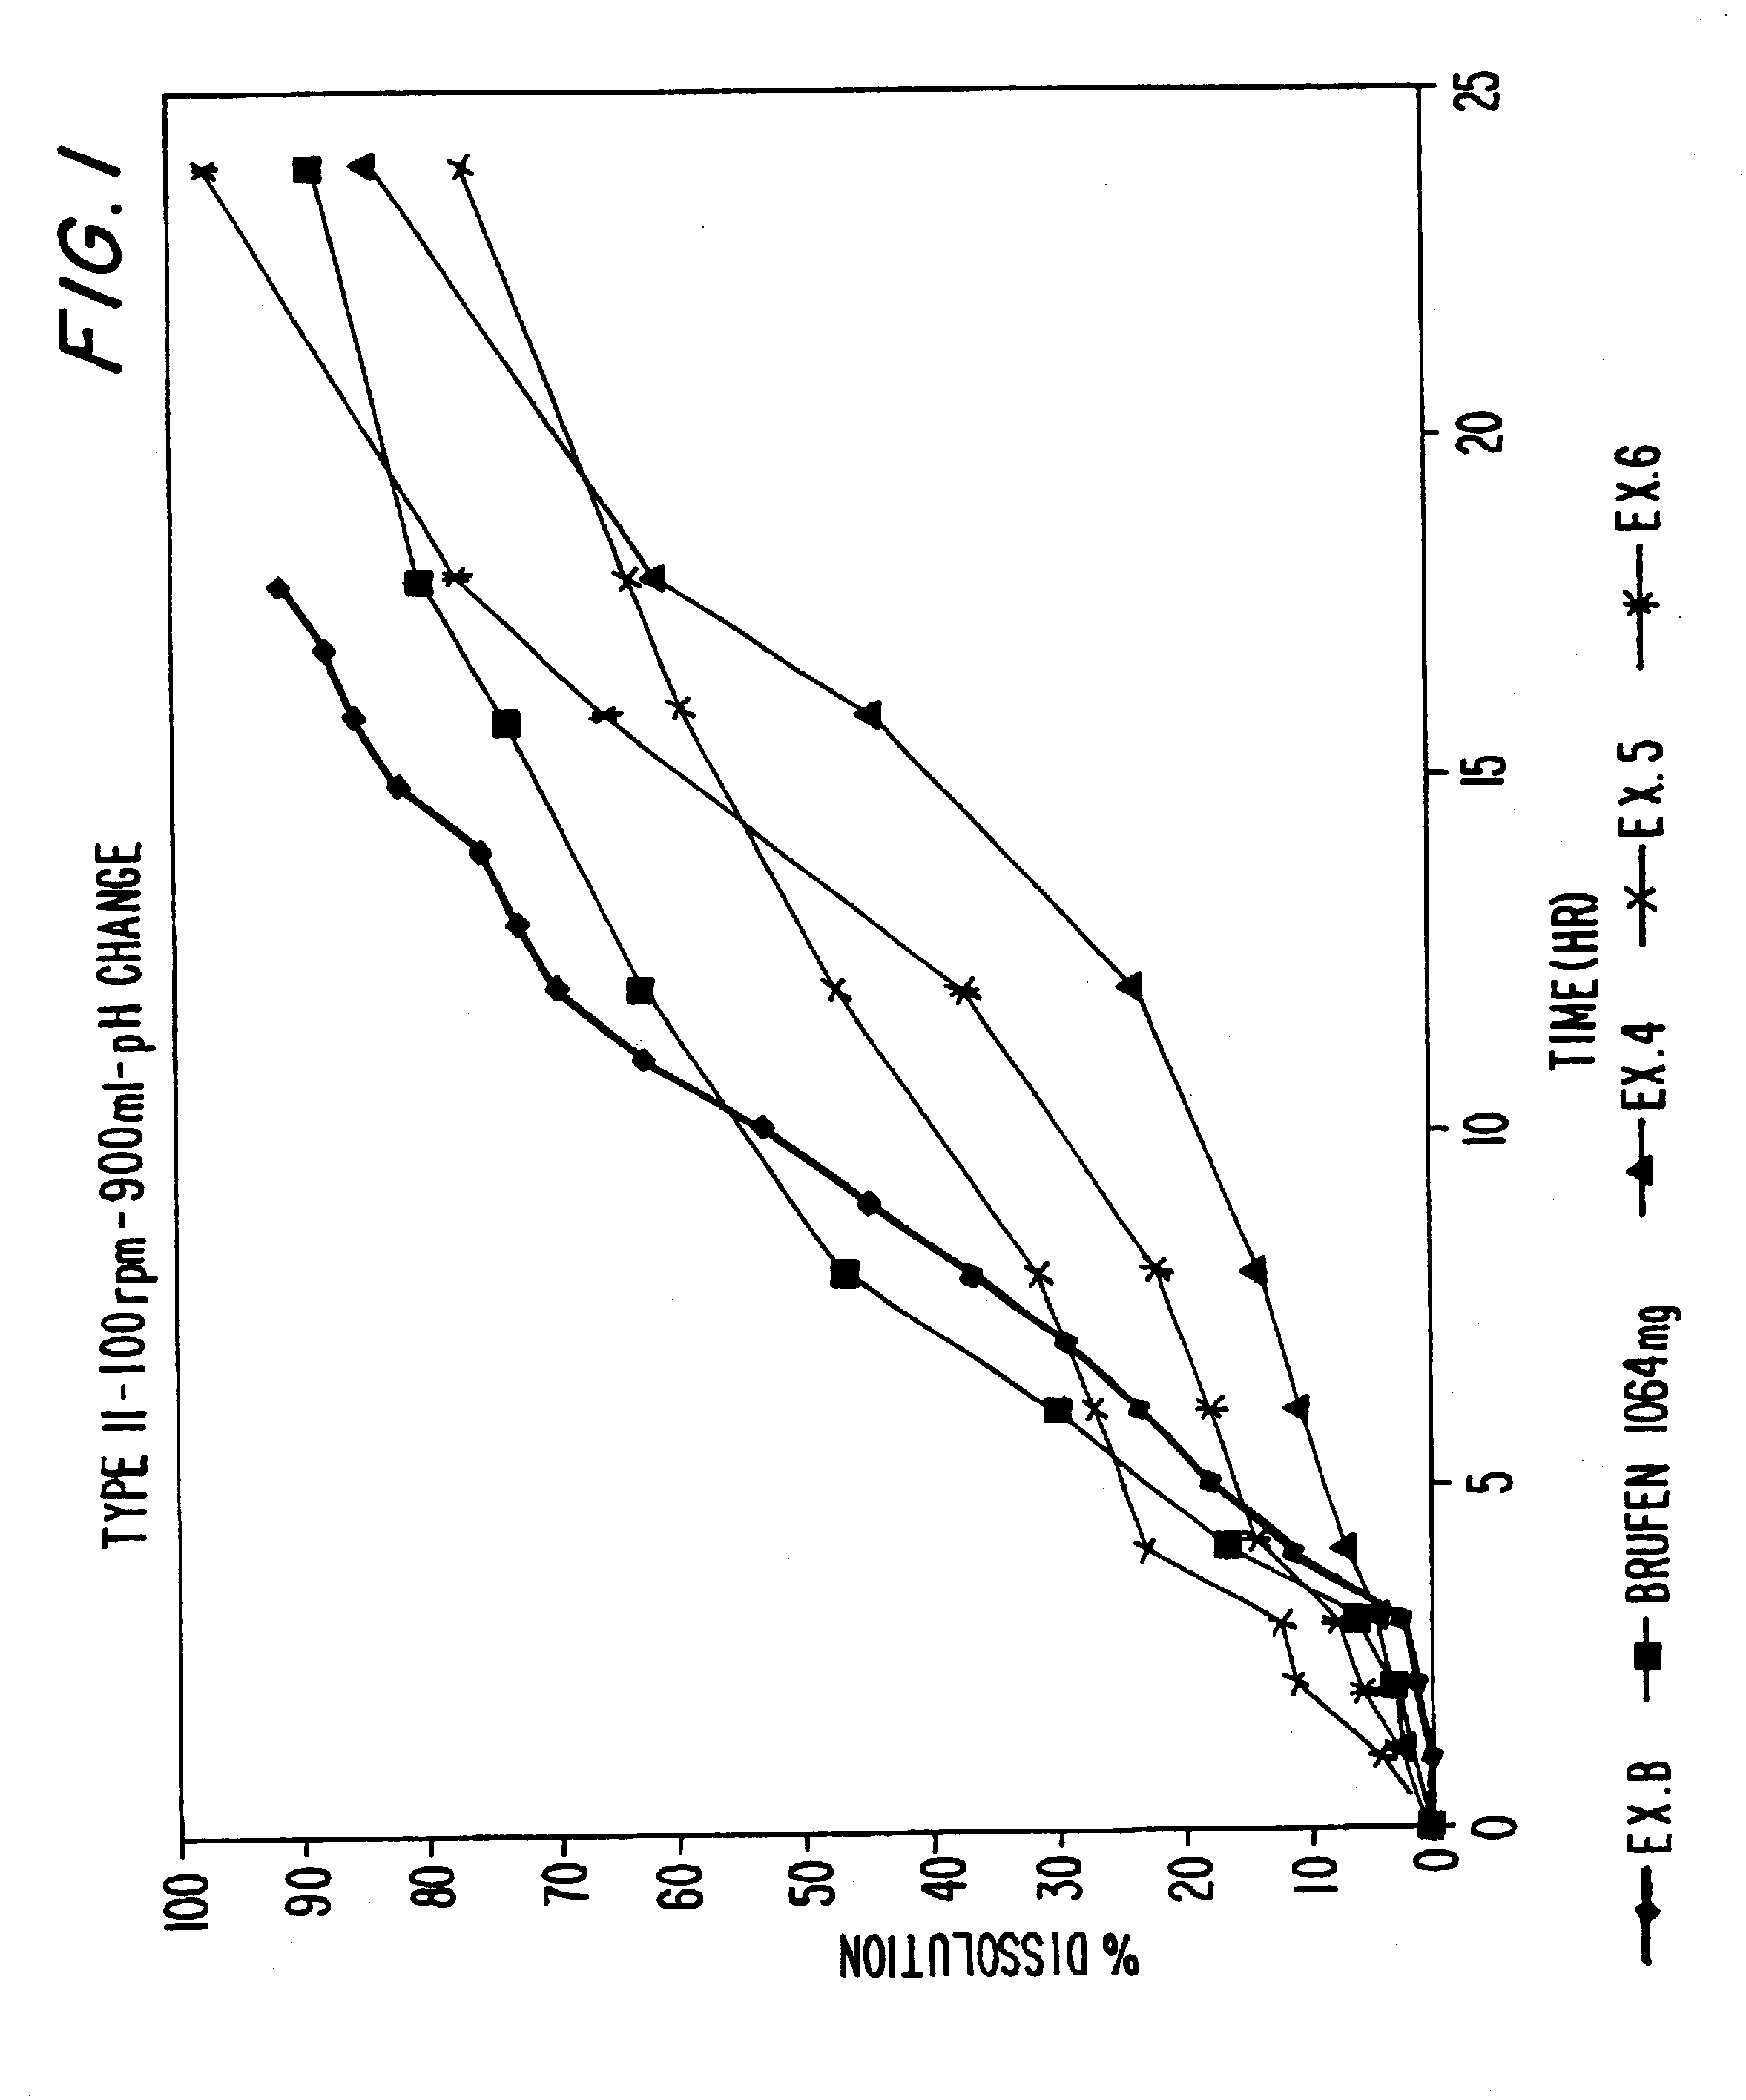 Sustained release matrix for high-dose insoluble drugs